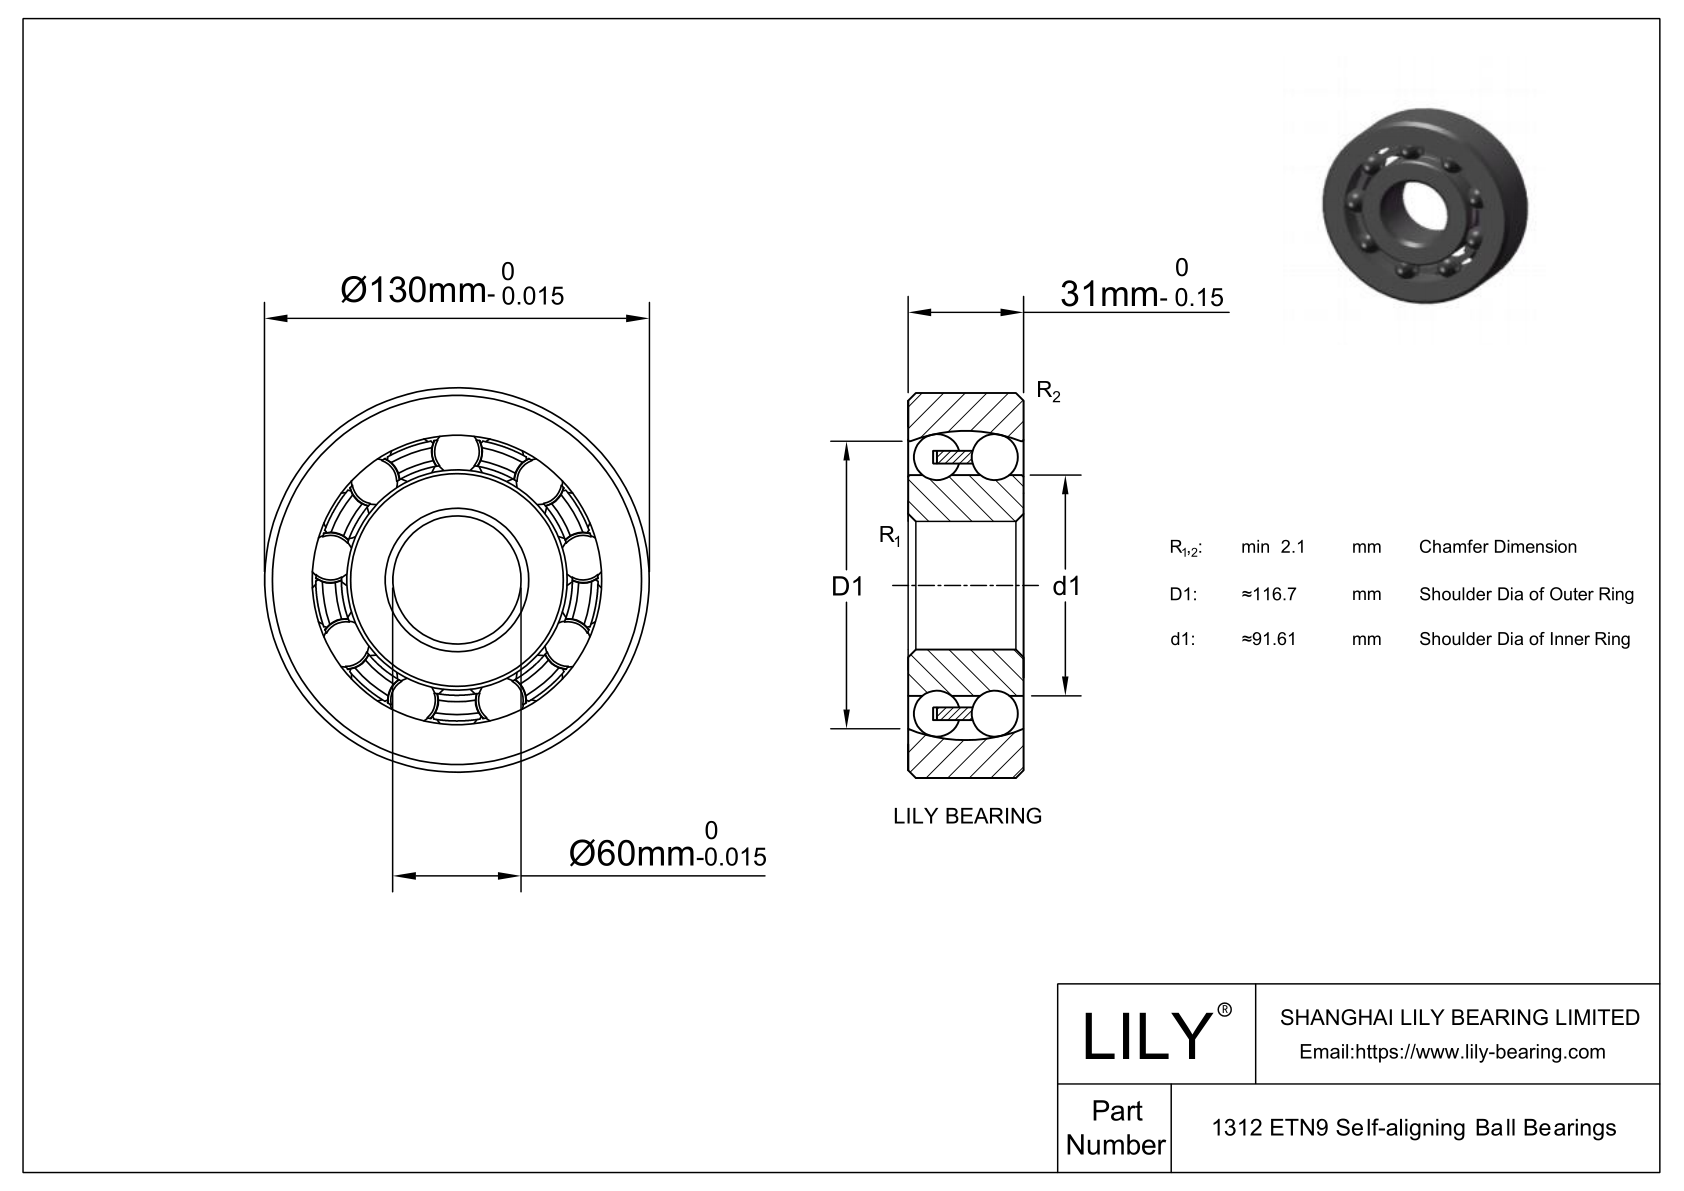 S1312 ETN9 Stainless Steel Self Aligning Ball Bearings cad drawing